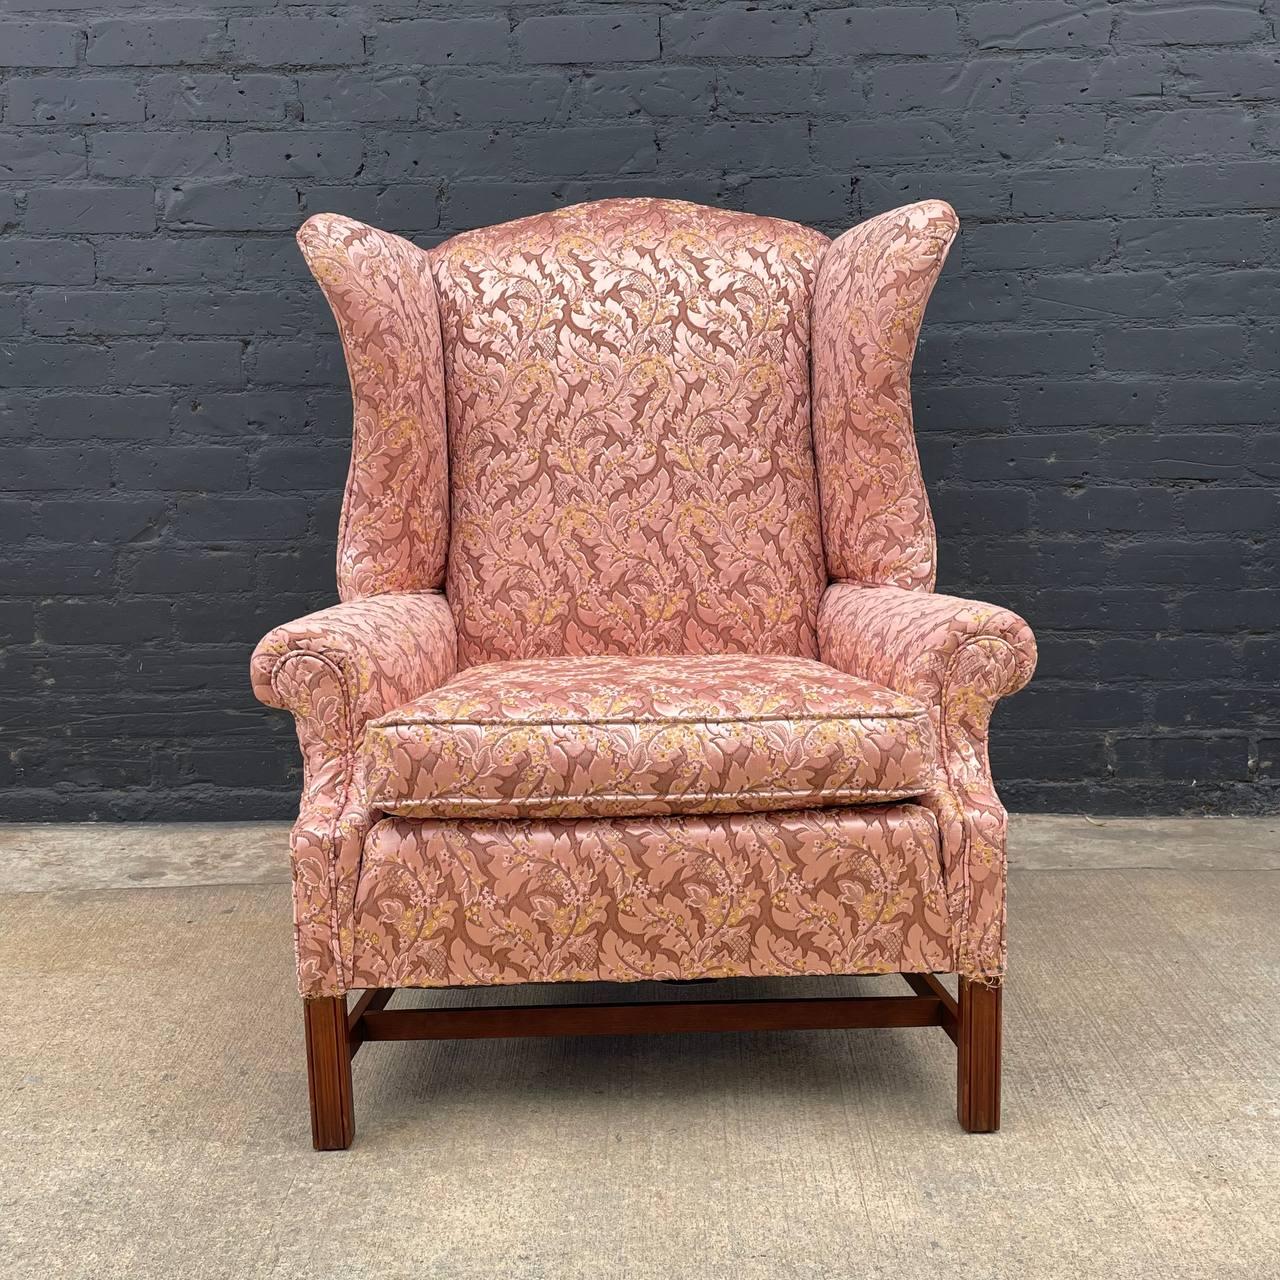 American Antique Georgian English Style Wing Back Lounge Chair For Sale